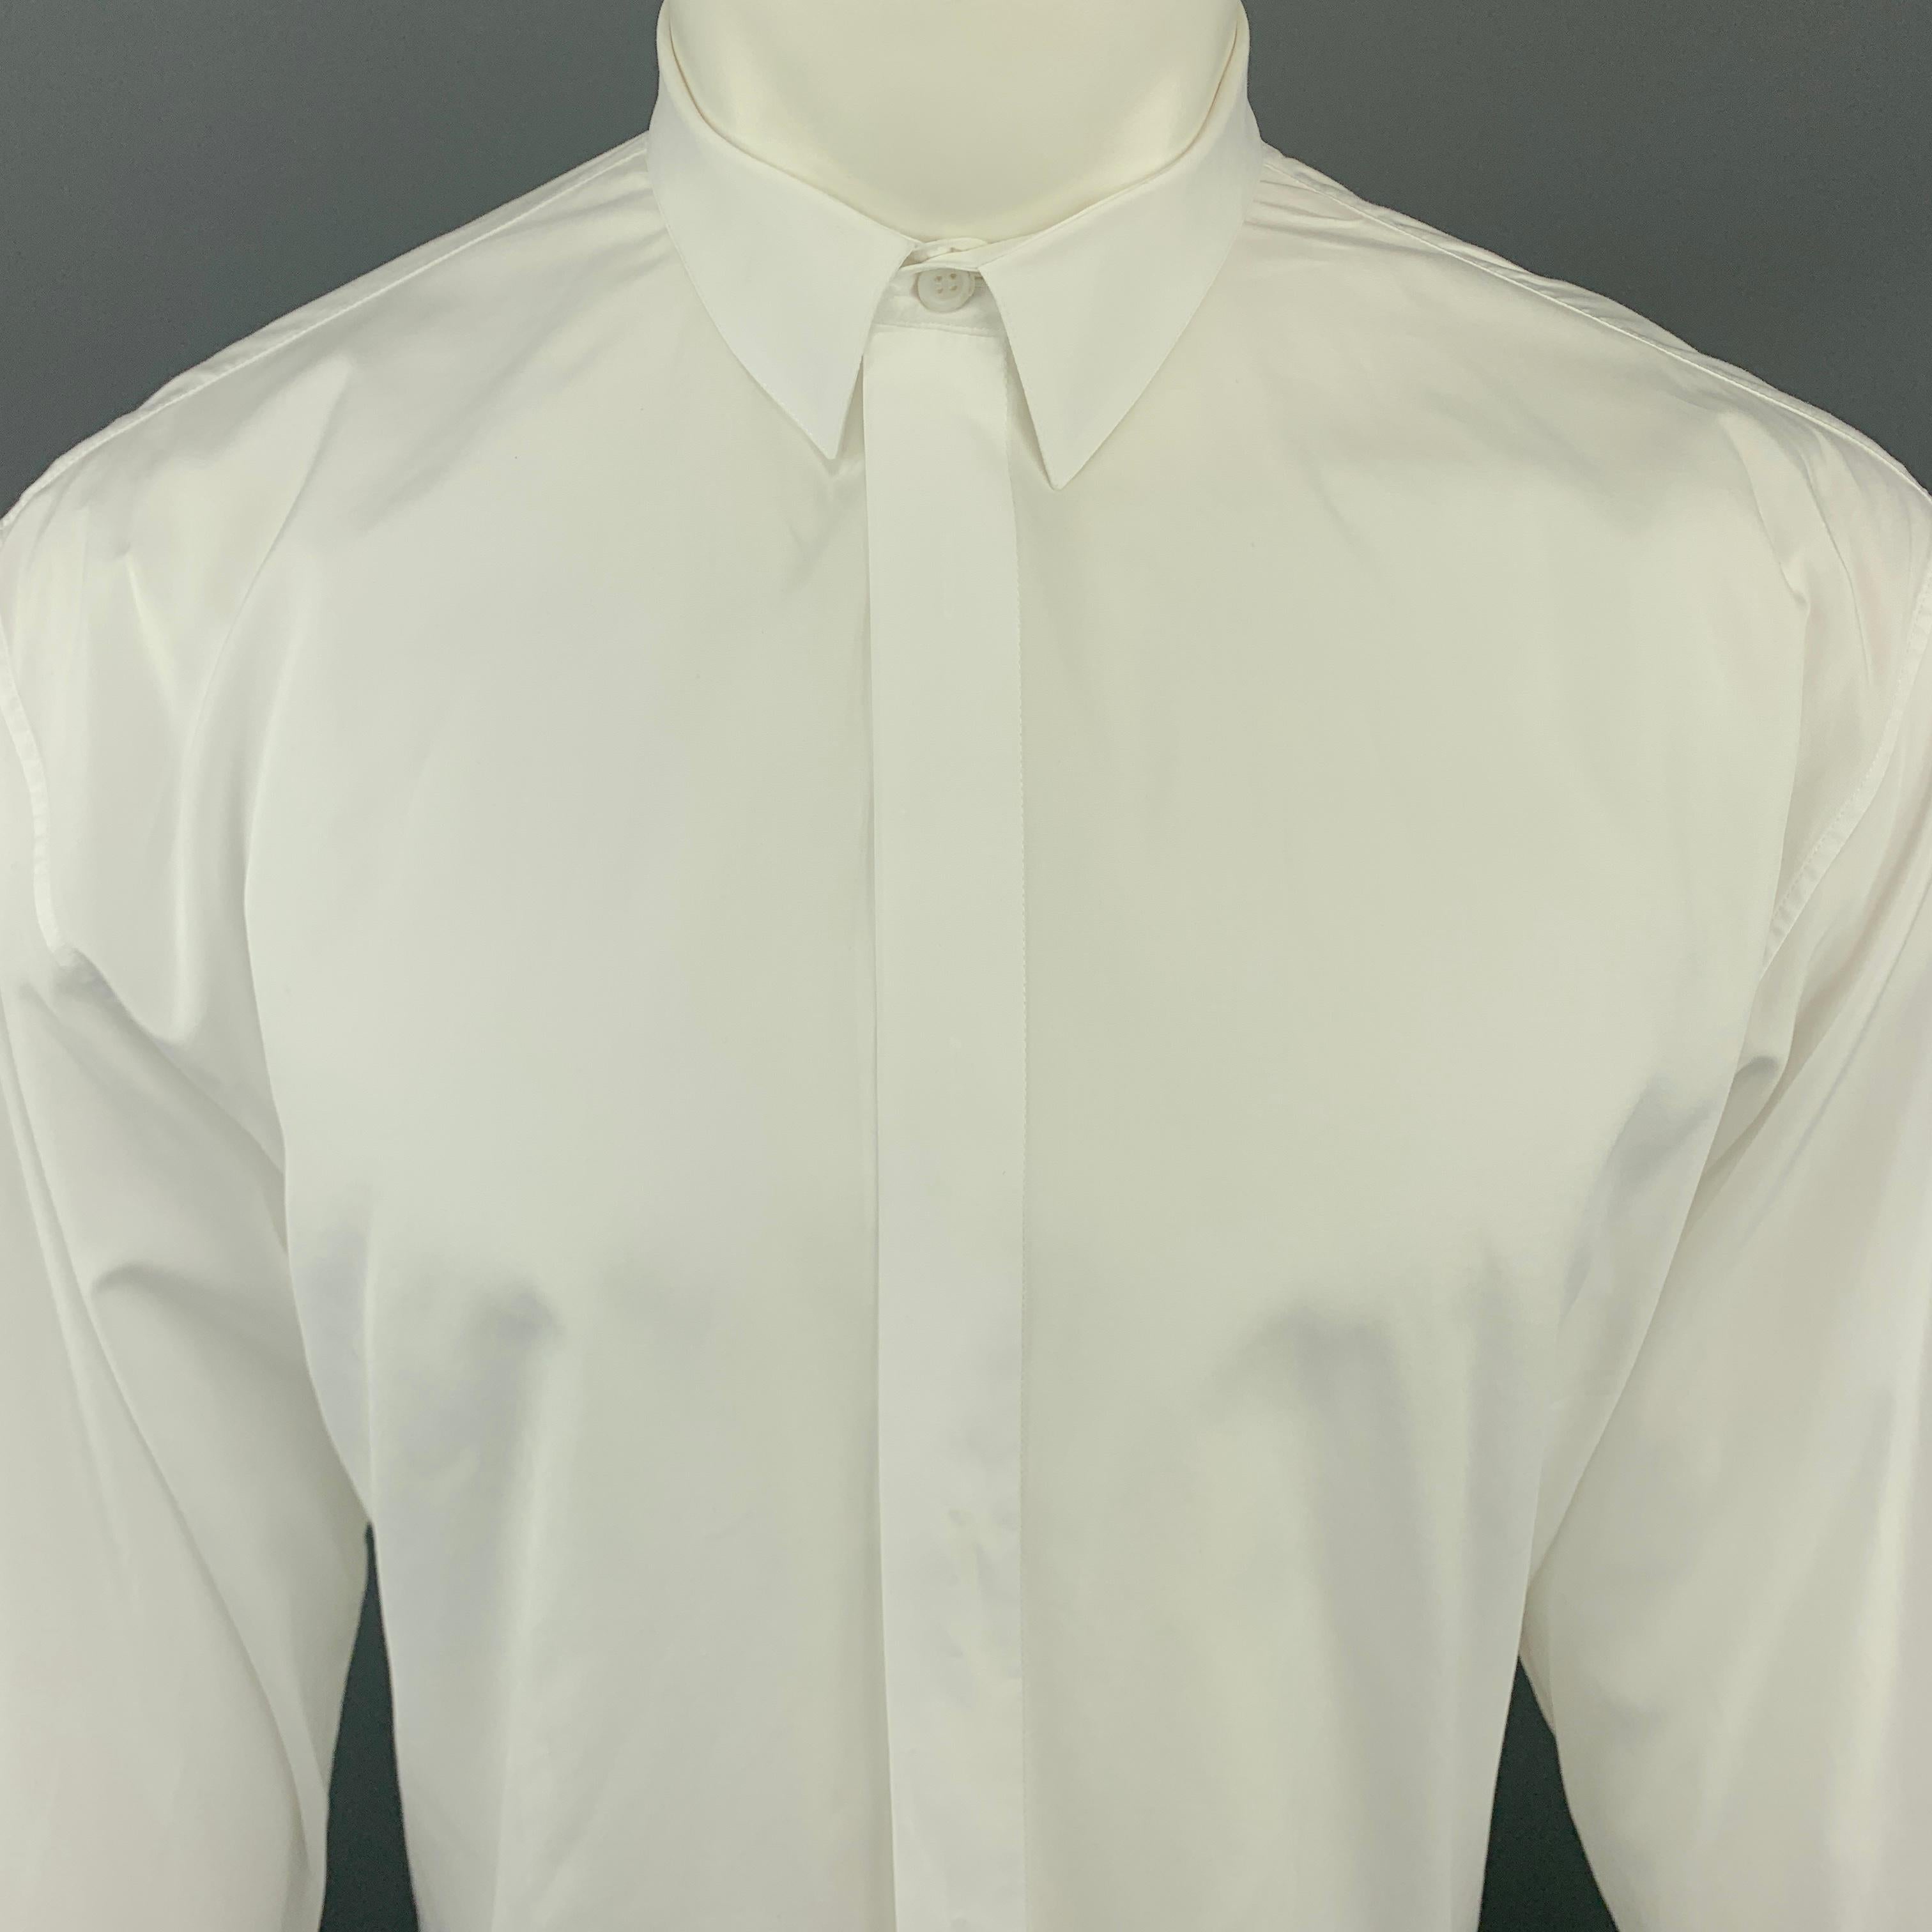 DIOR HOMME Long Sleeve Shirt comes in a white tone in a solid cotton material, with hidden buttons at closure, buttoned cuffs, button up, and a bee embroidered at front. Made in Italy.

Excellent Pre-Owned Condition.
Marked: